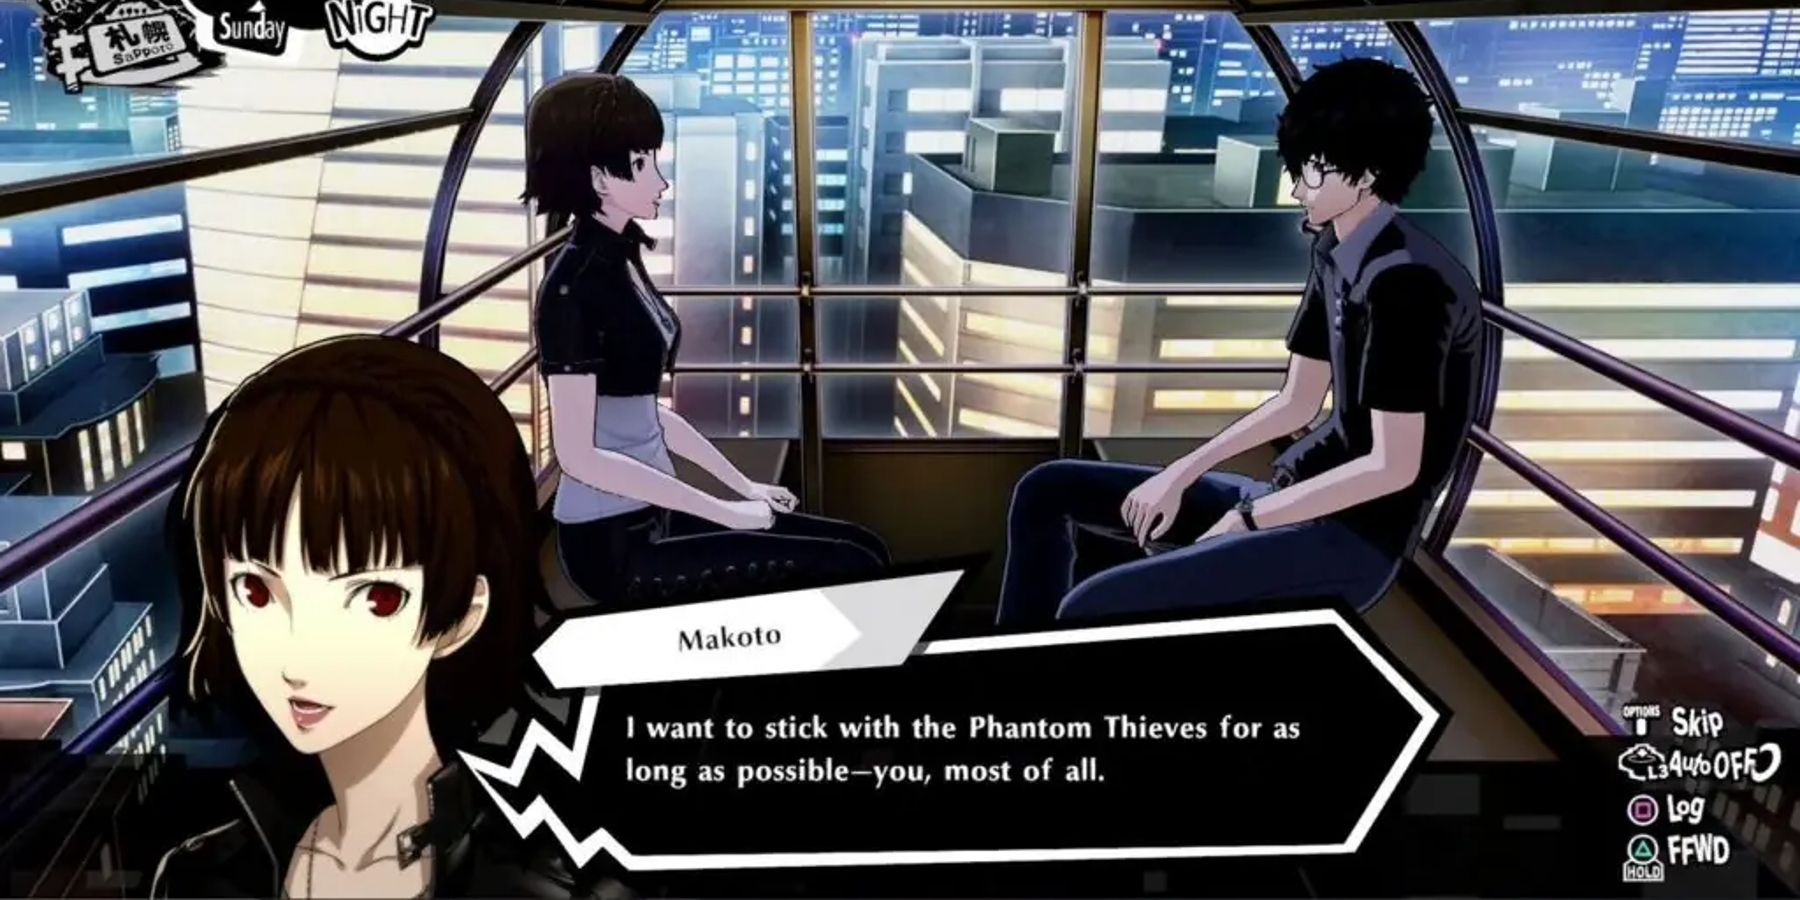 Persona 5 Royal's Many Romance Events Could Lead to Mechanical Romance